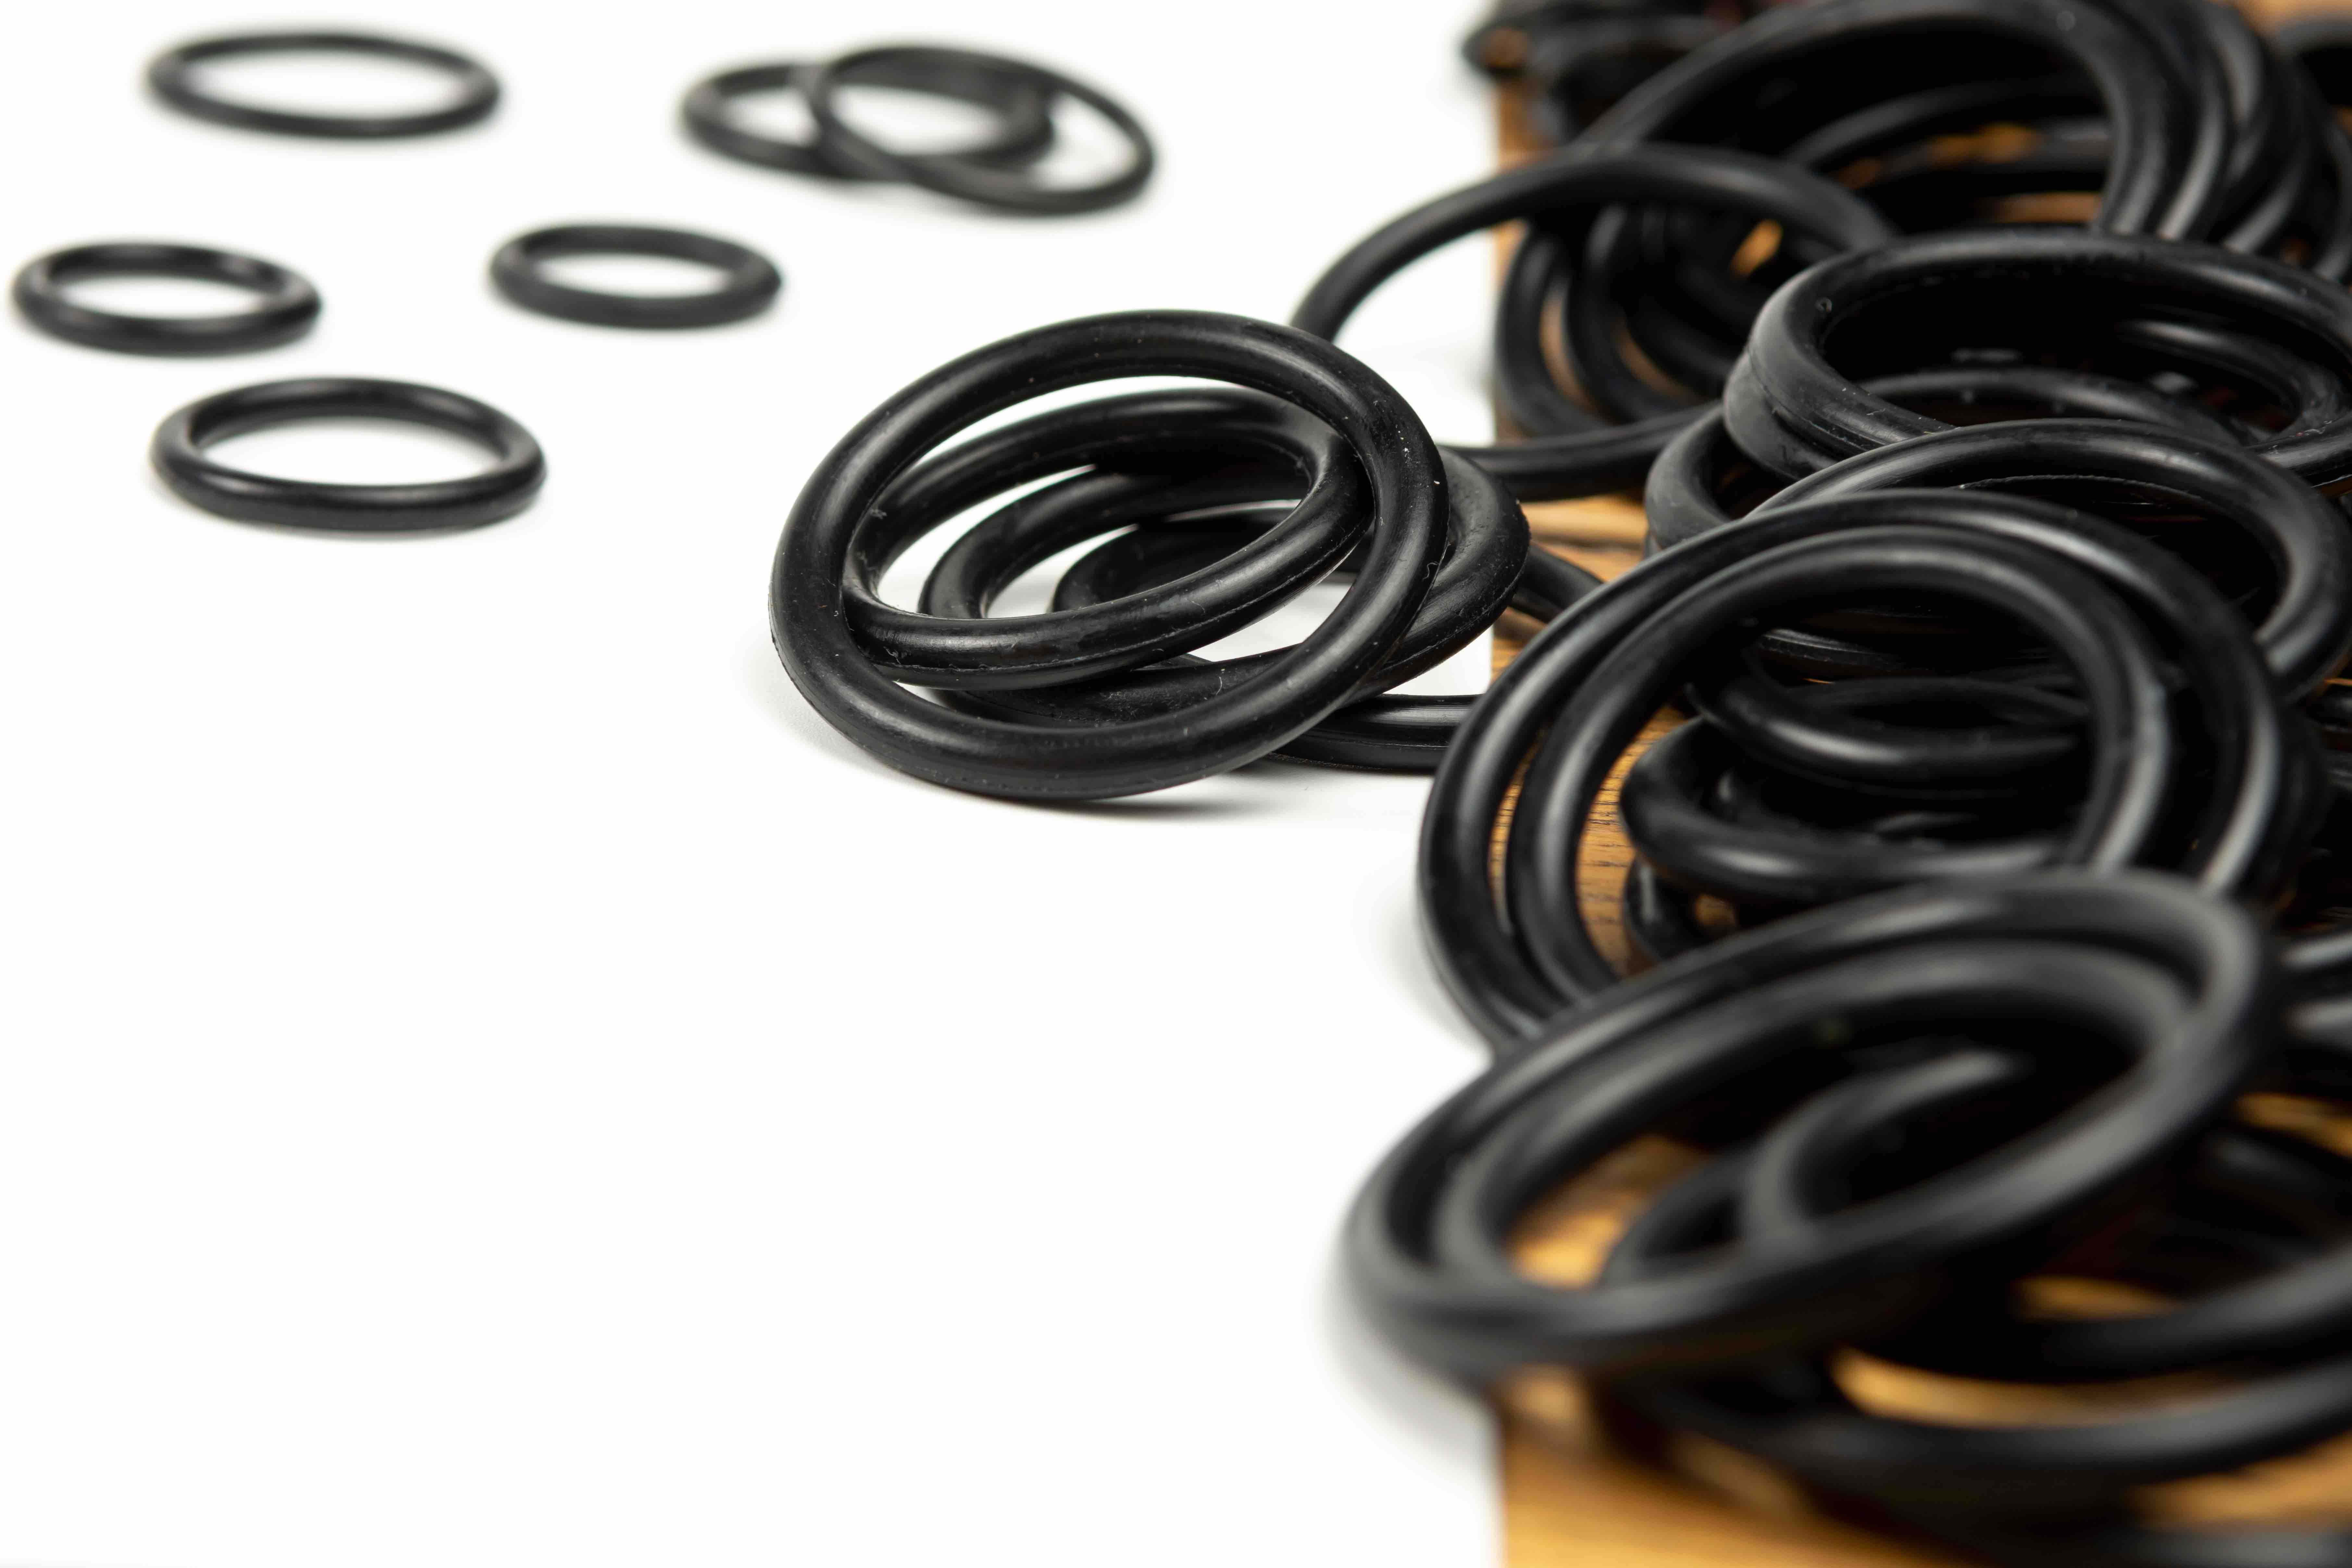 Silicone O-Rings  Global O-Ring and Seal